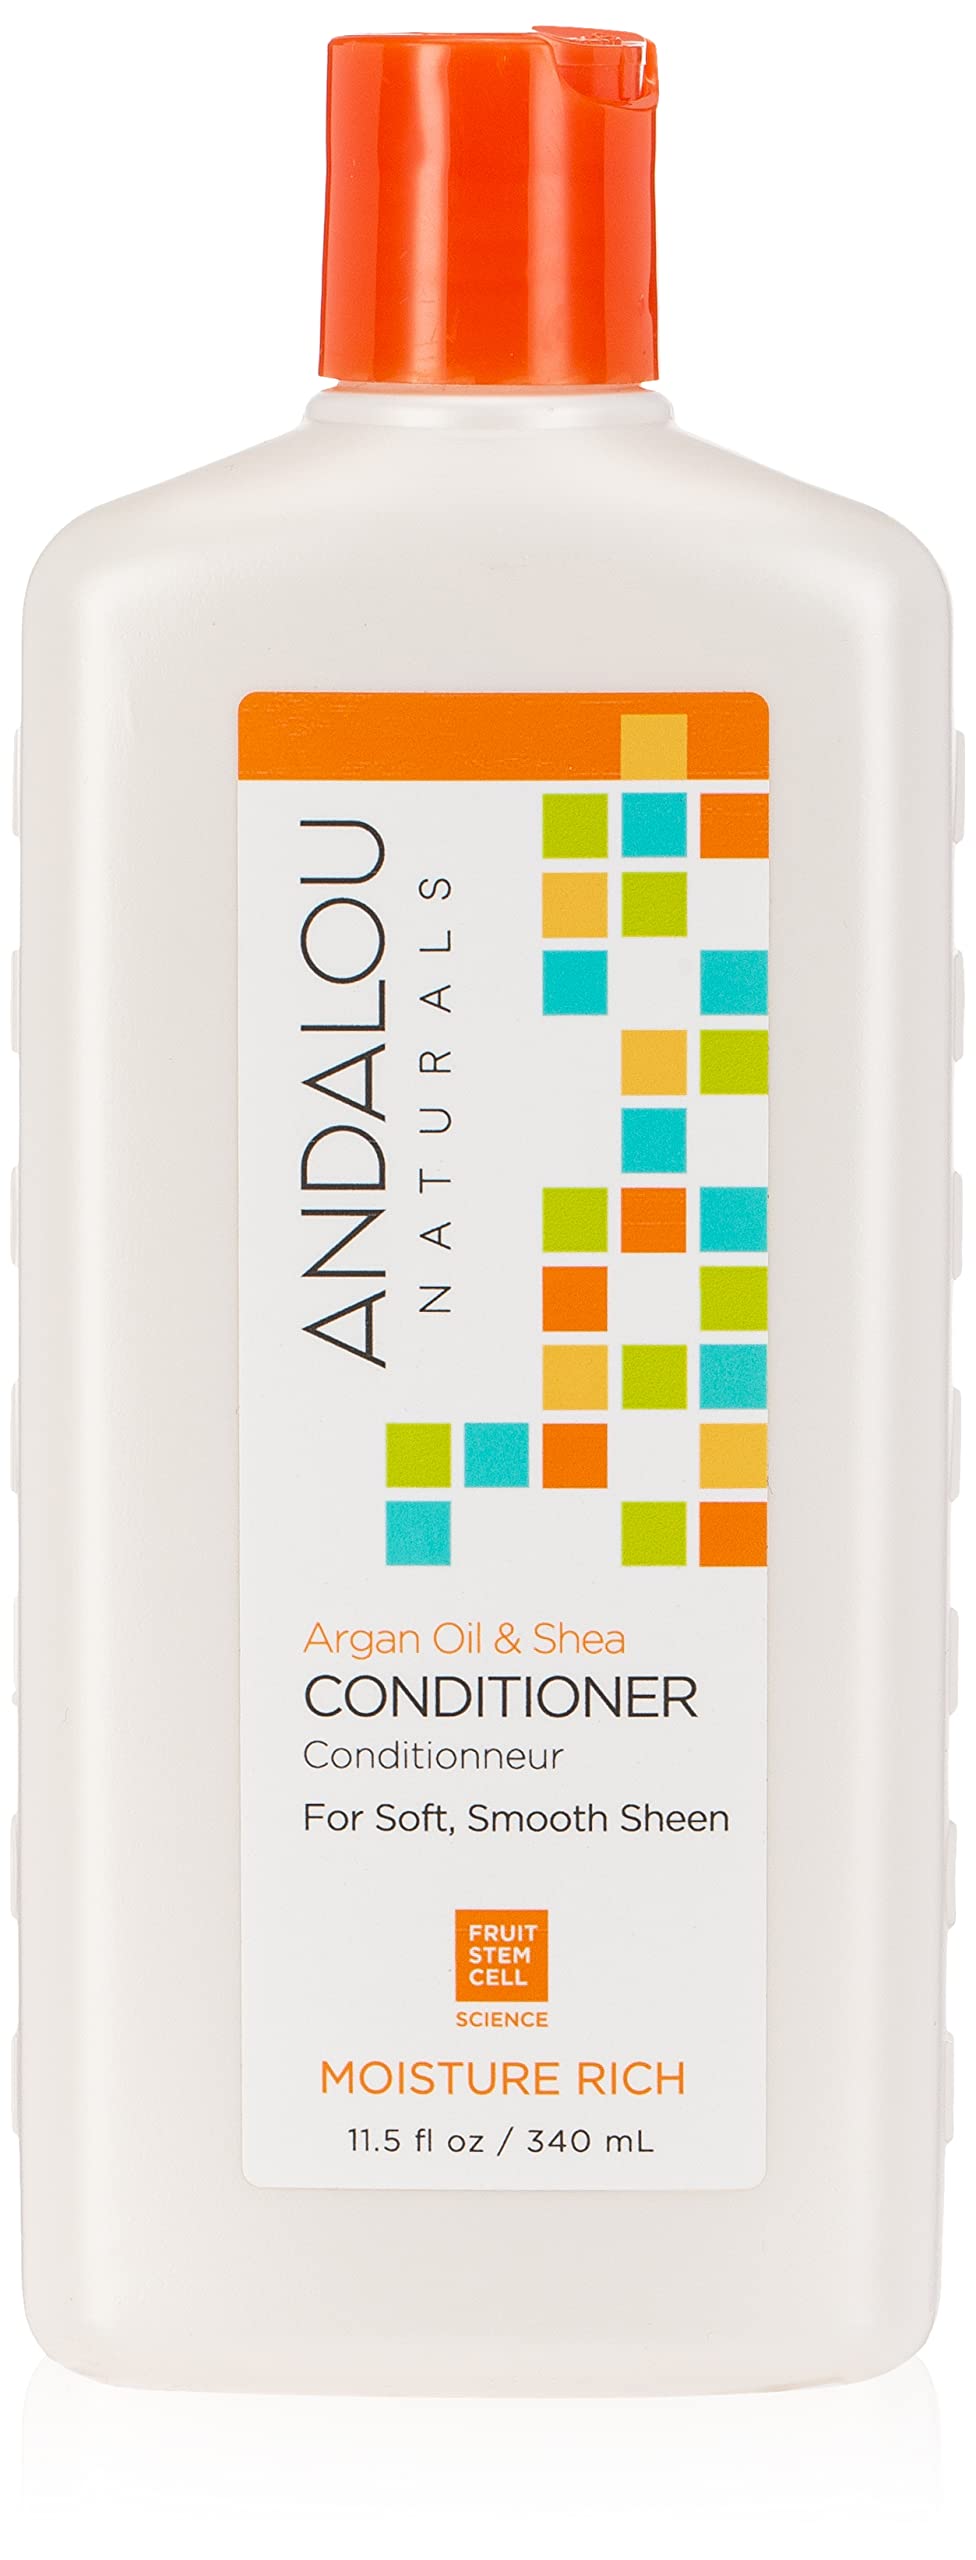 Andalou Naturals Conditioner Ounce, 1 Pack, Moisture Rich Argan Oil and Shea, 11.5 Fl Oz